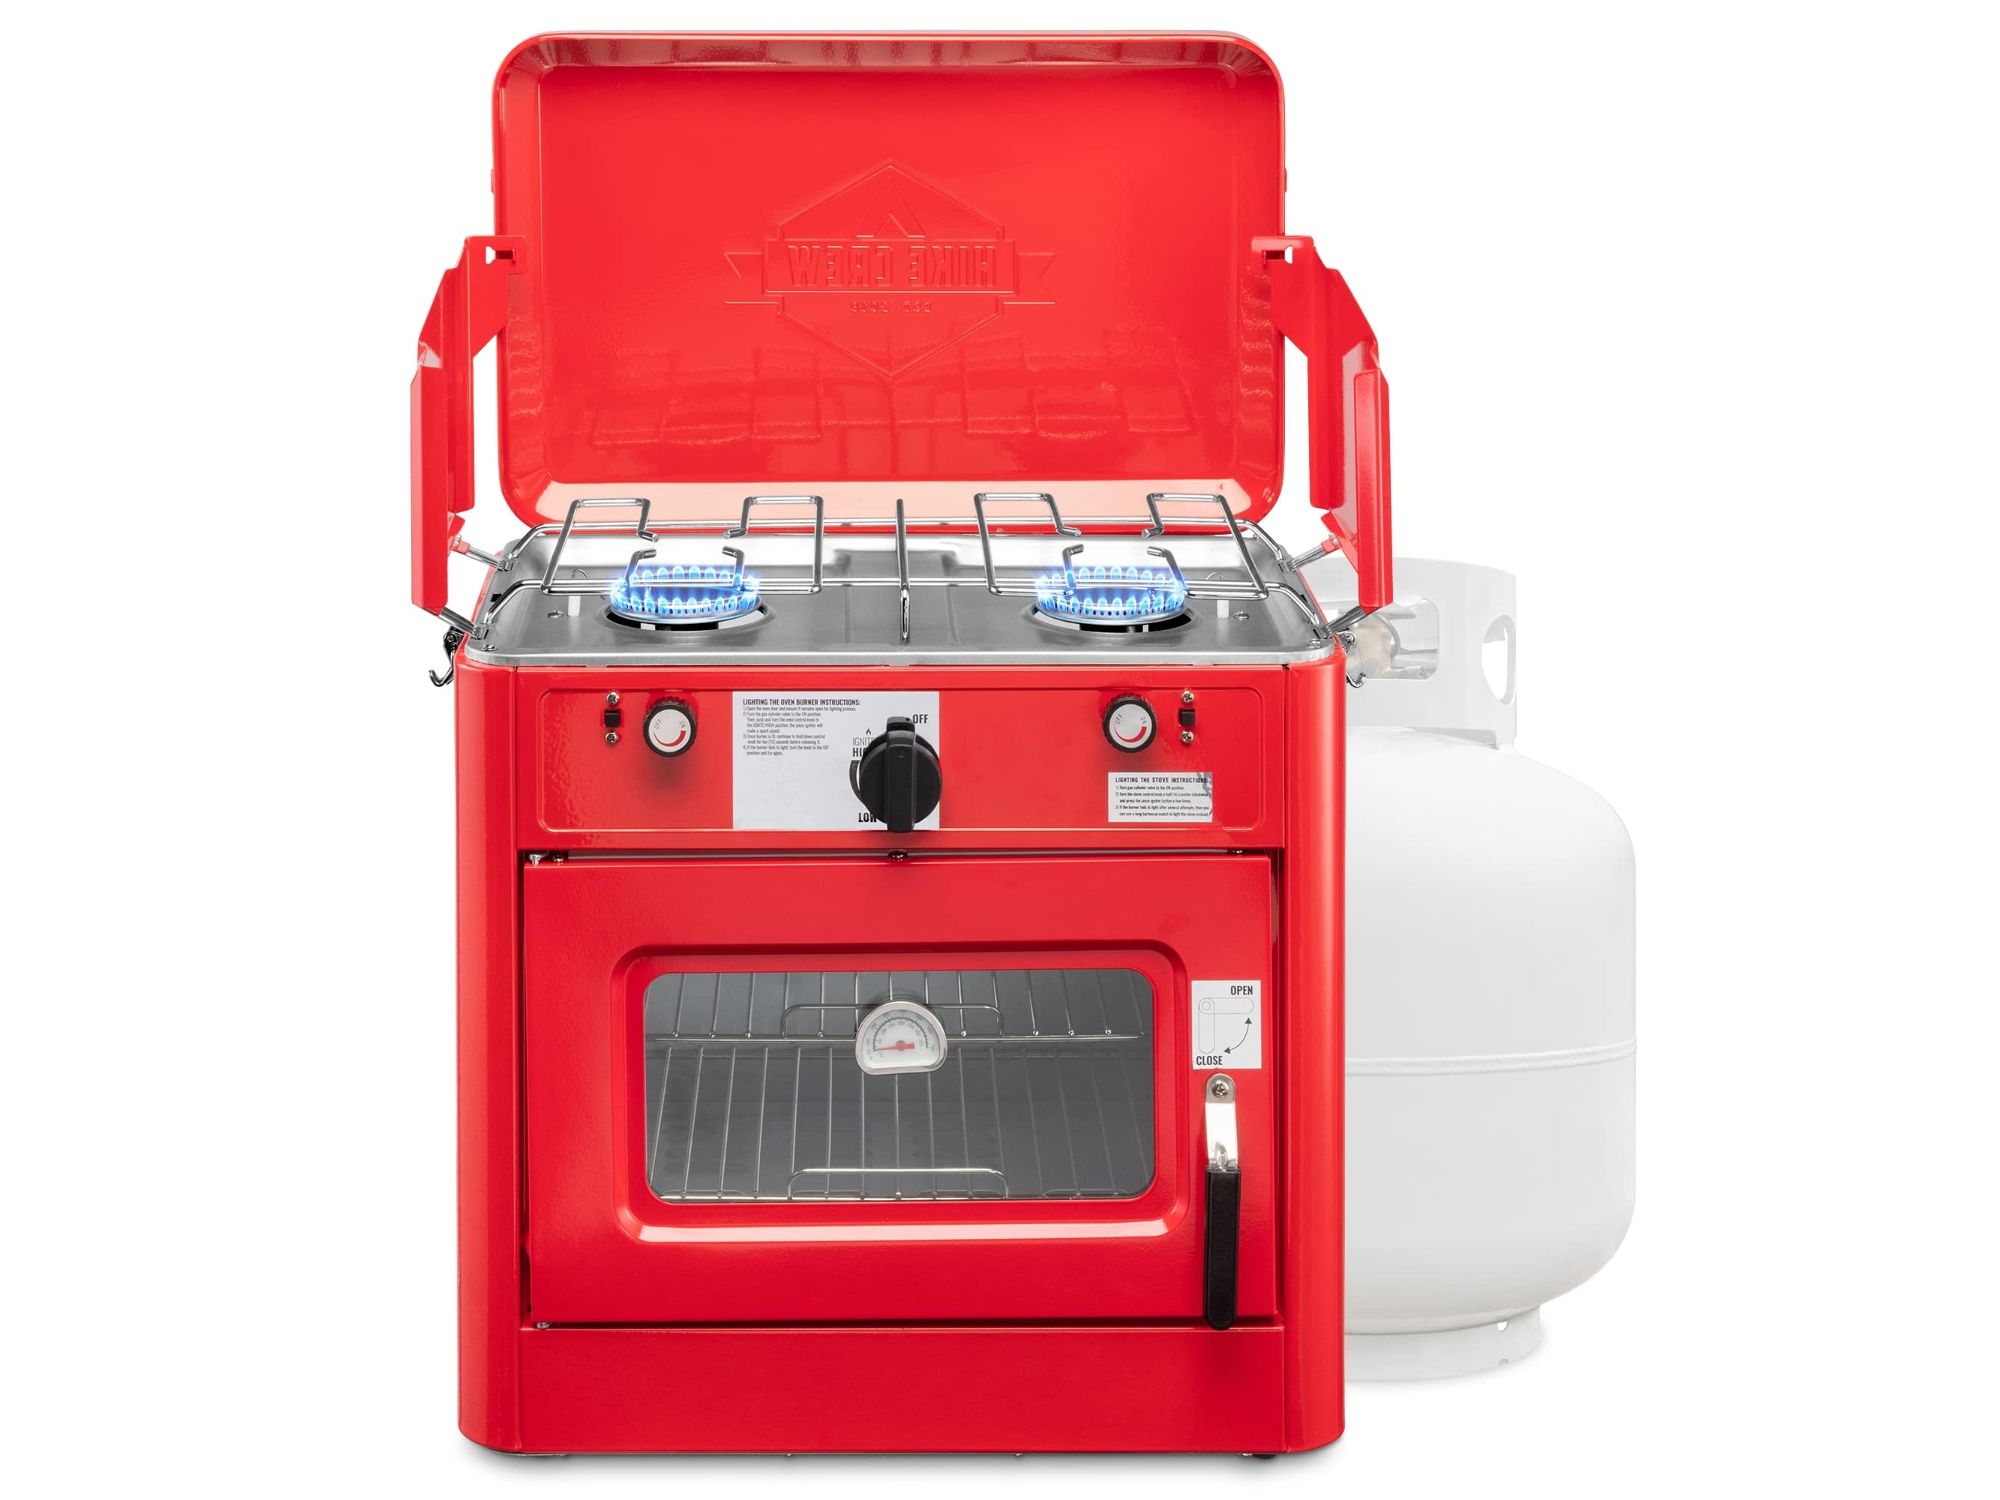 Image of Hike Crew 2-in-1 Gas Camping Portable Propane Stove & Oven with Grill Red ID 843812139663